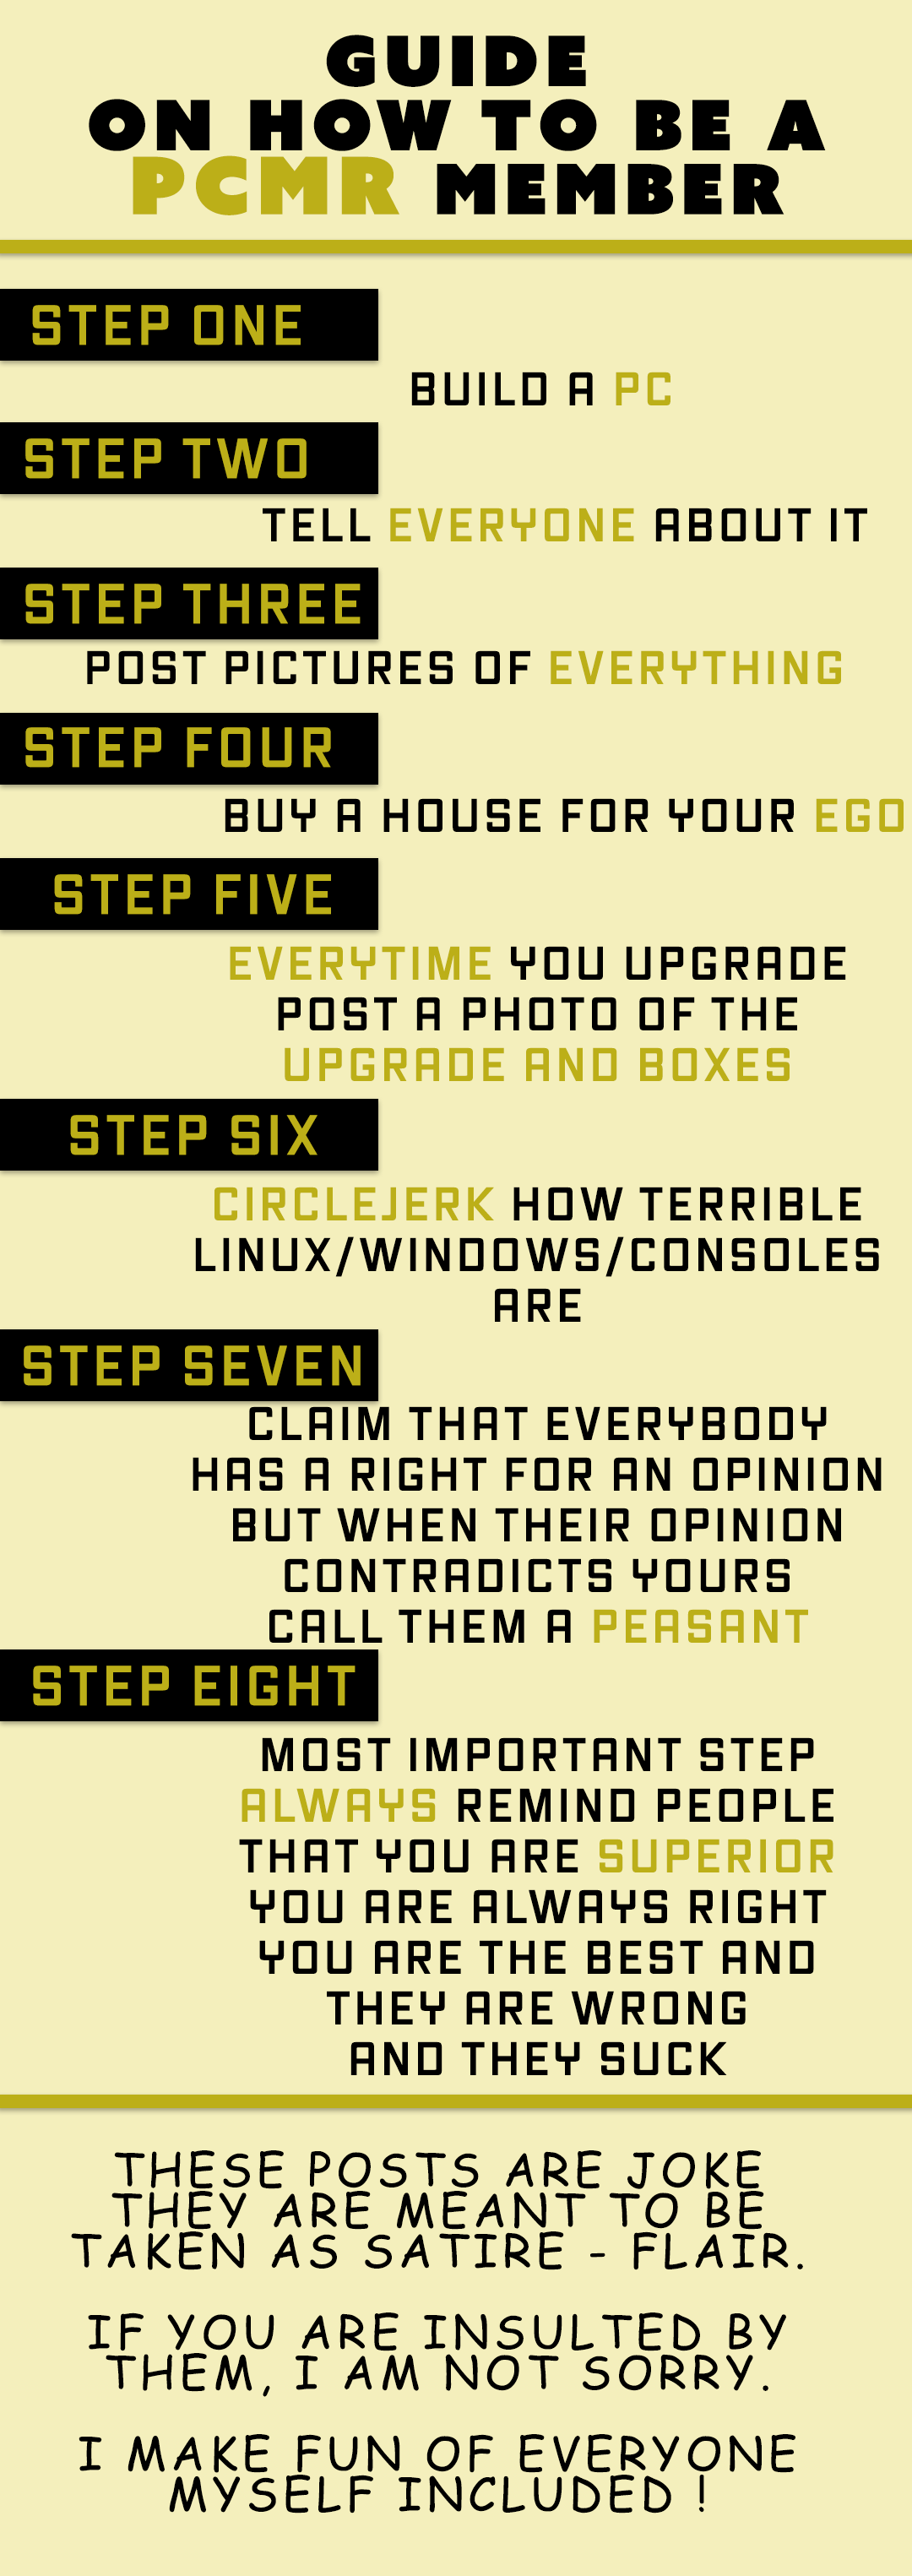 GUIDE ON HOW TO BE A PCMR MEMBER !